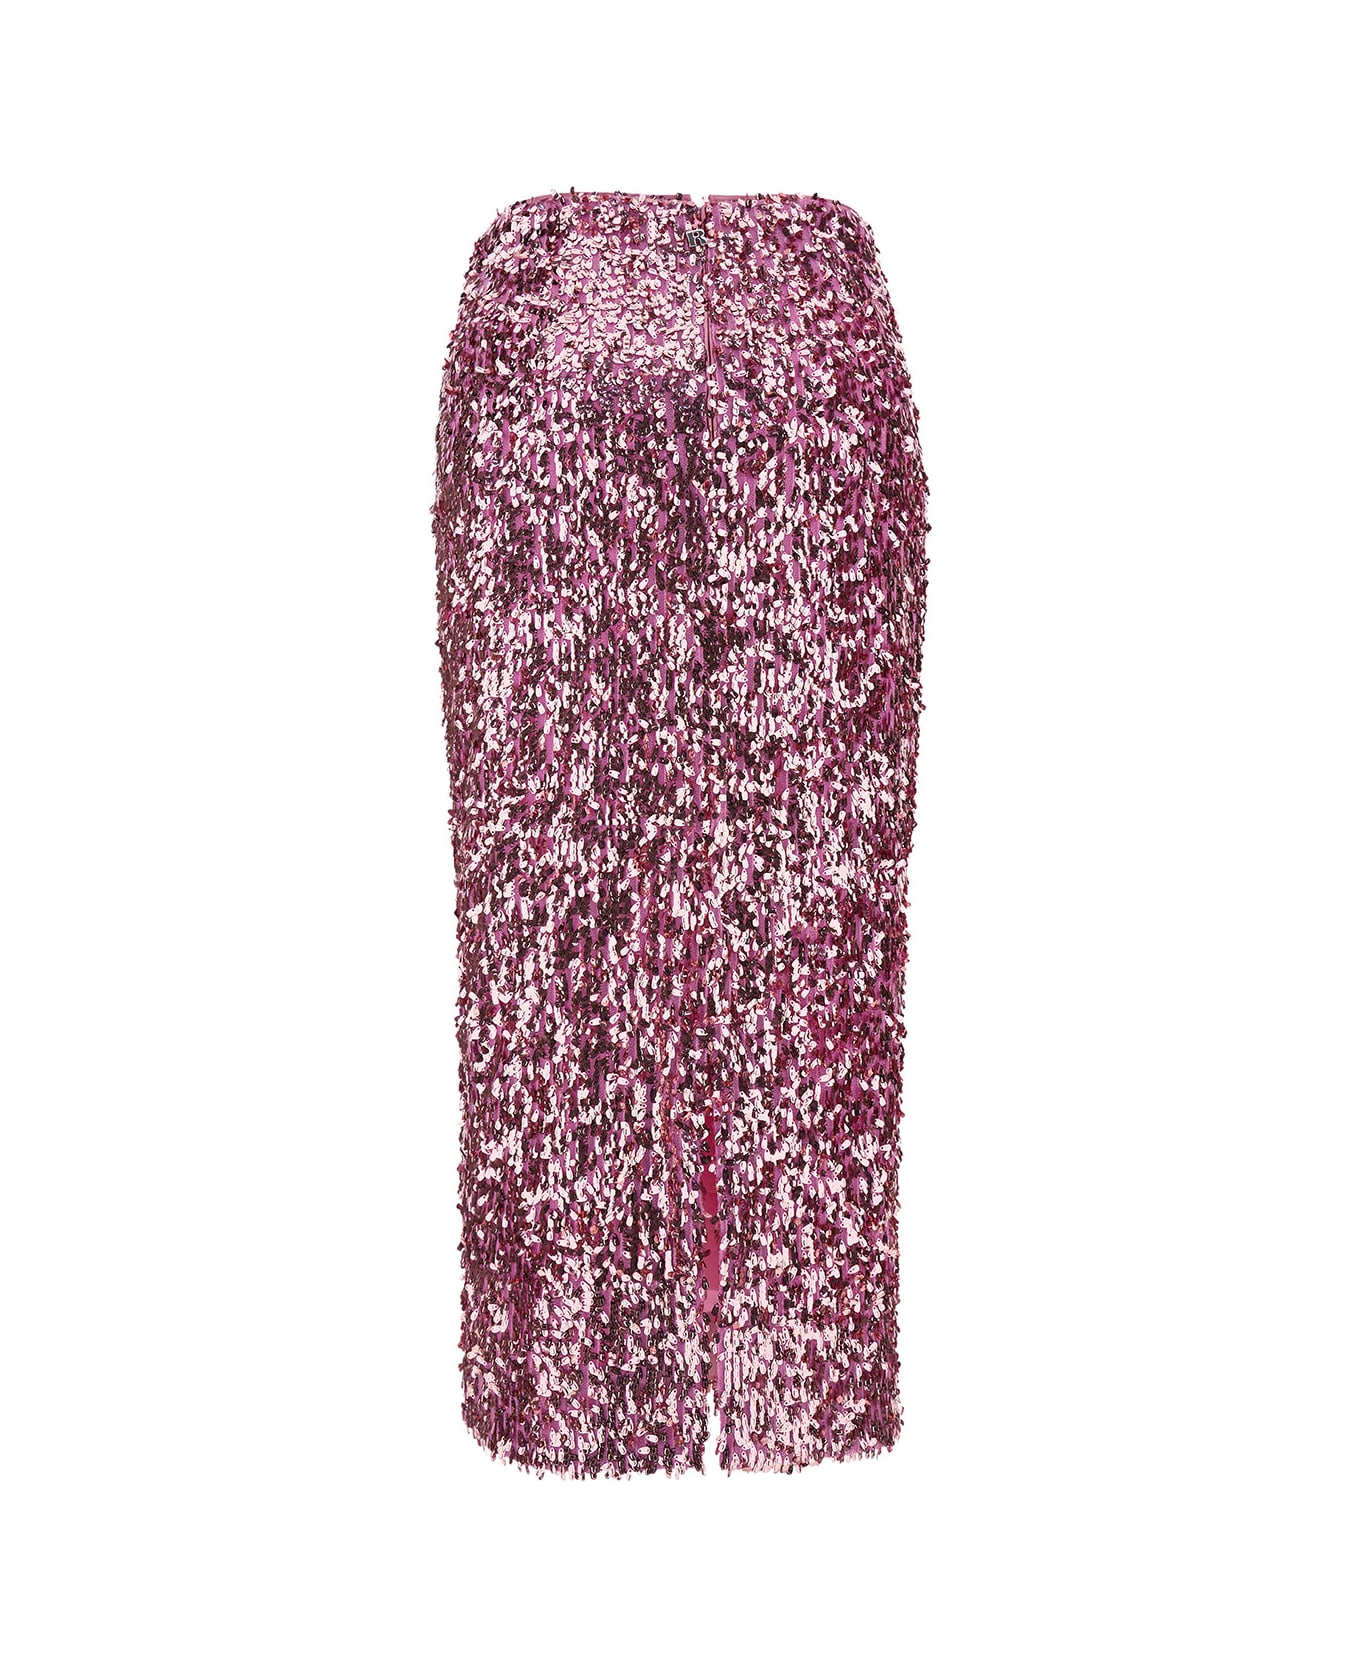 Rotate by Birger Christensen Pink Pencil Skirt With All-over Sequins Embellishment In Tech Fabric Woman - Pink